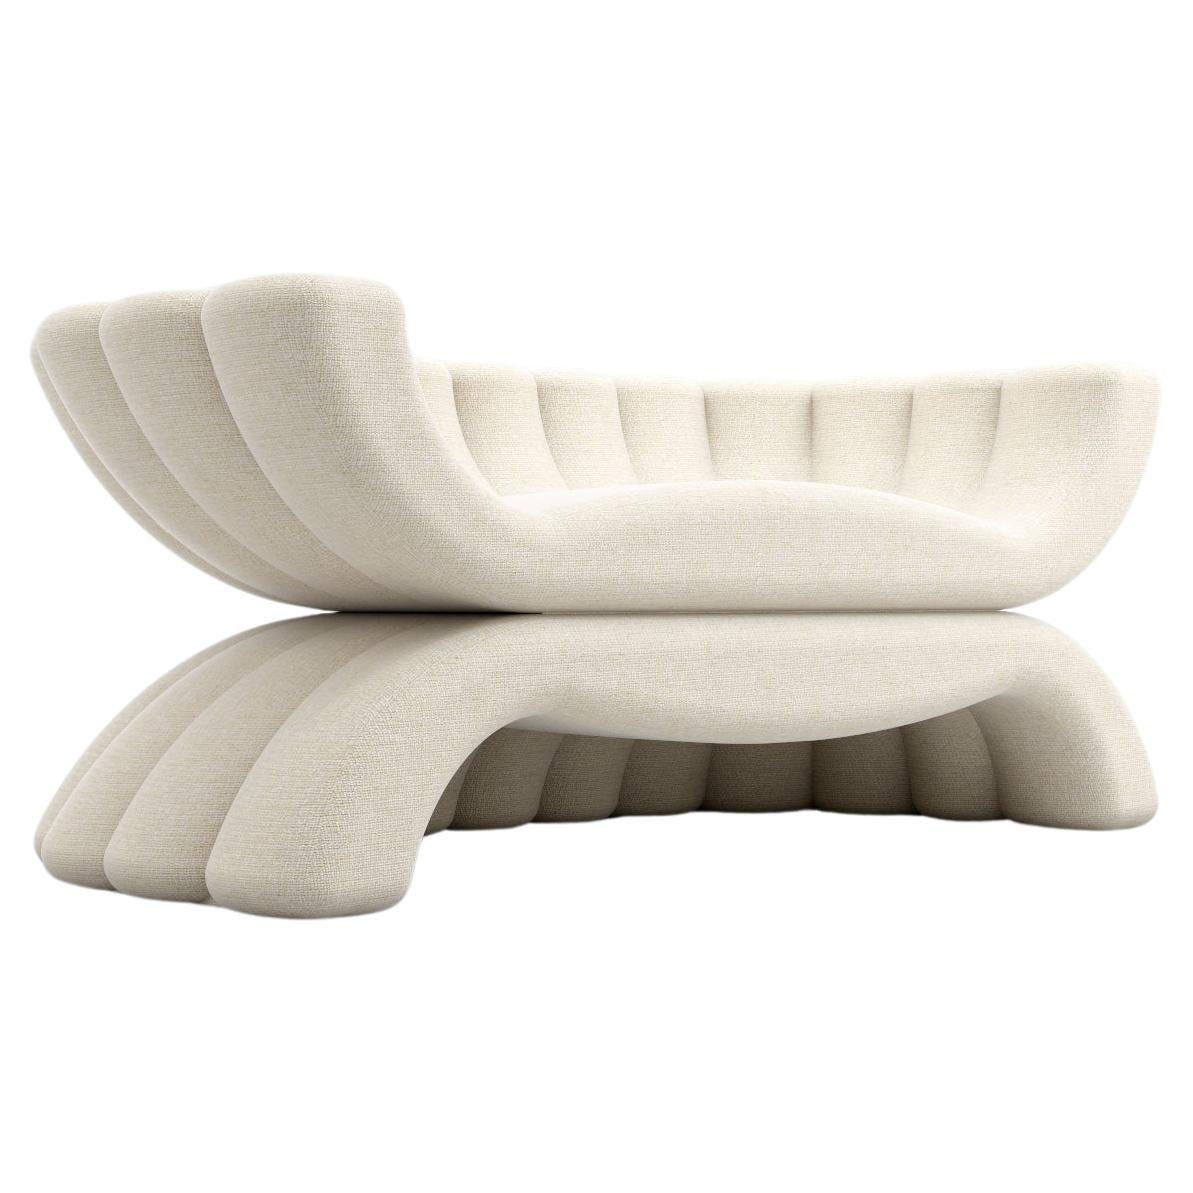 Shell 2S Sofa - Modern White Two Seat Sofa For Sale